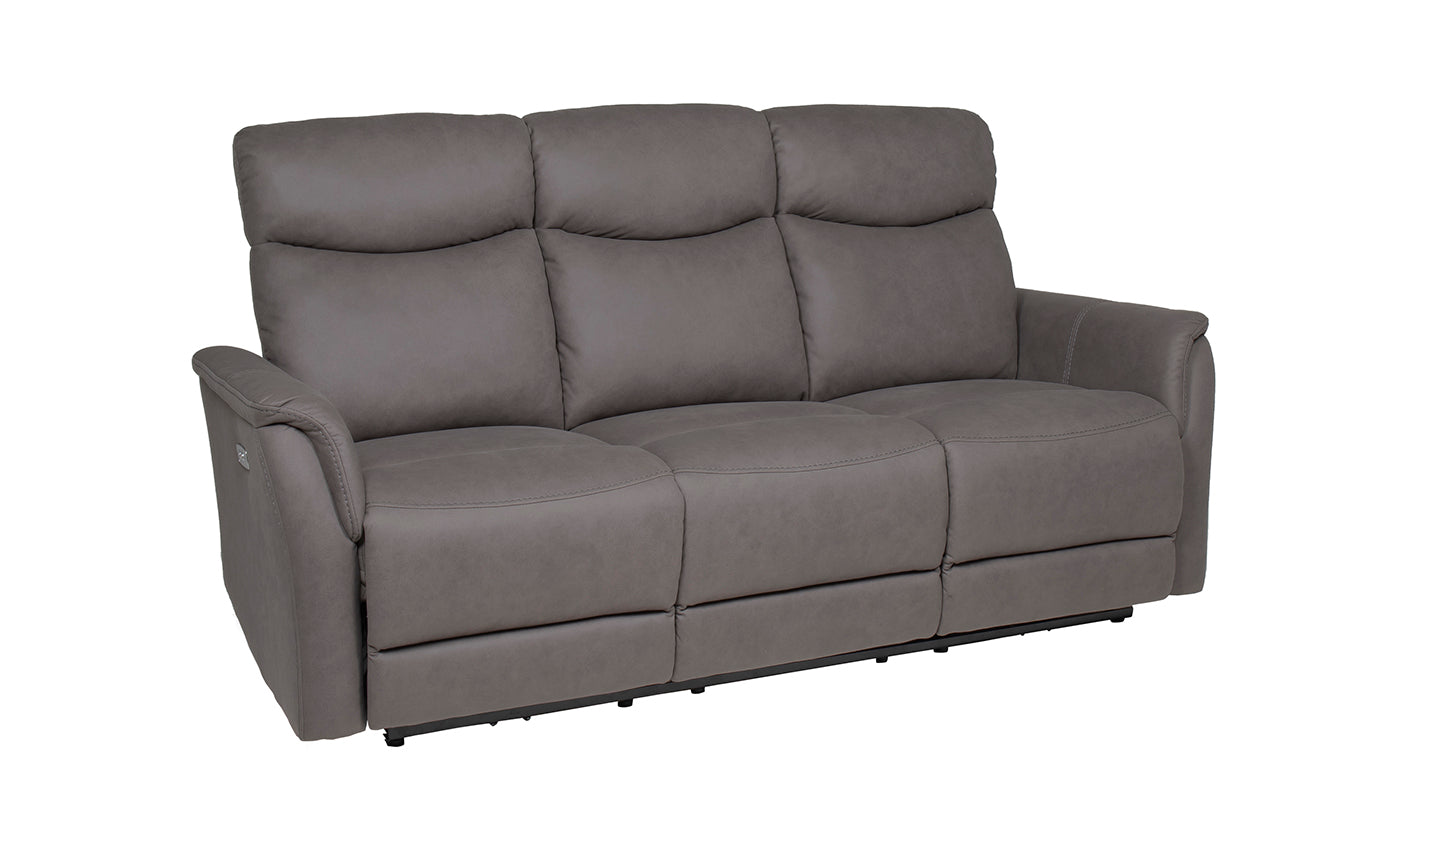 Mortimer 3 Seater Electric Recliner - Grey